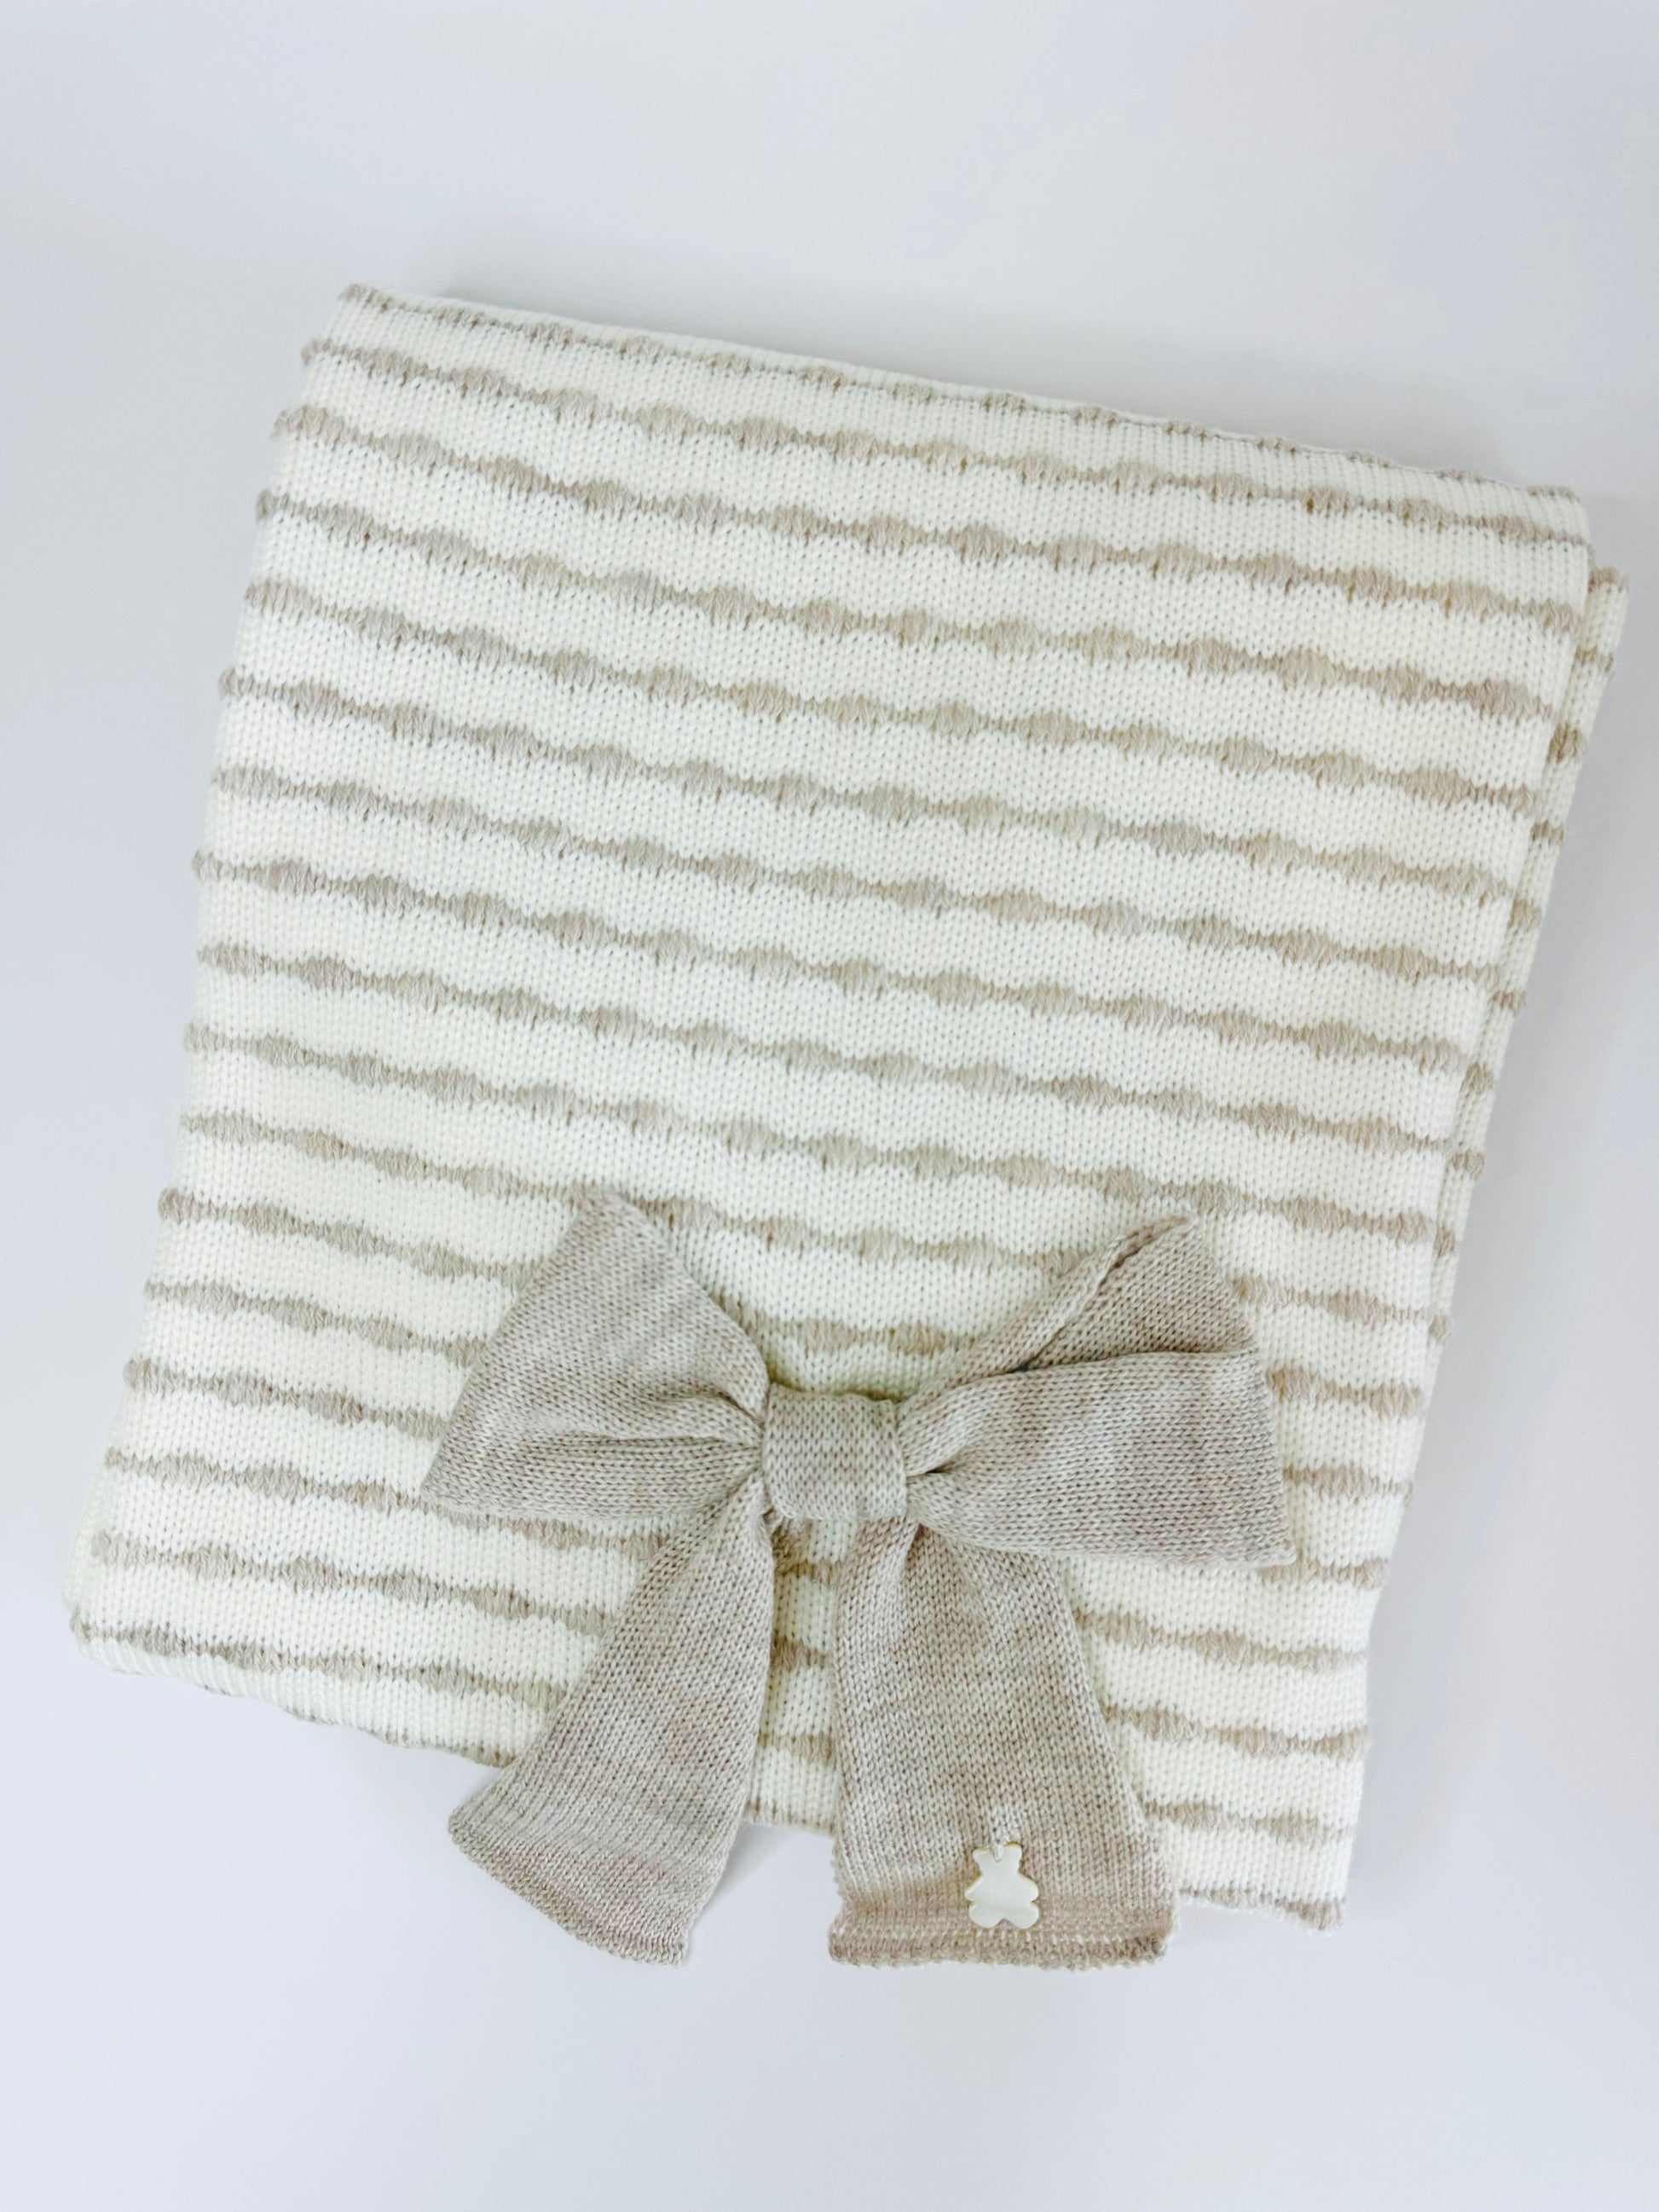 Koally Baby Sets 0-3M Luca Italian Wool Couture Set